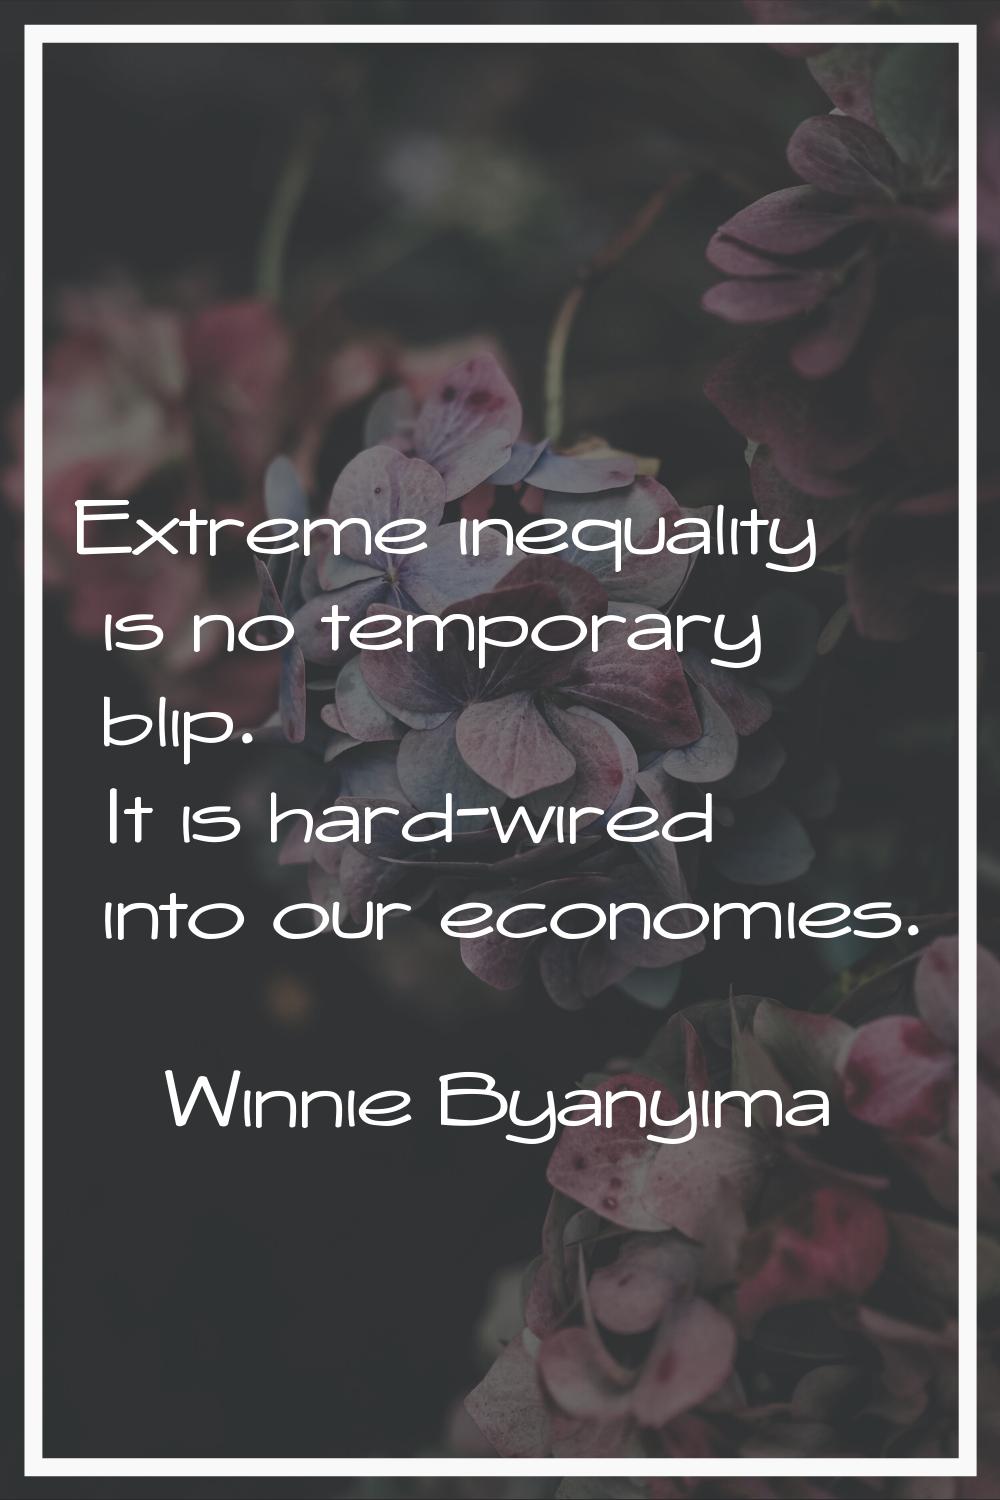 Extreme inequality is no temporary blip. It is hard-wired into our economies.